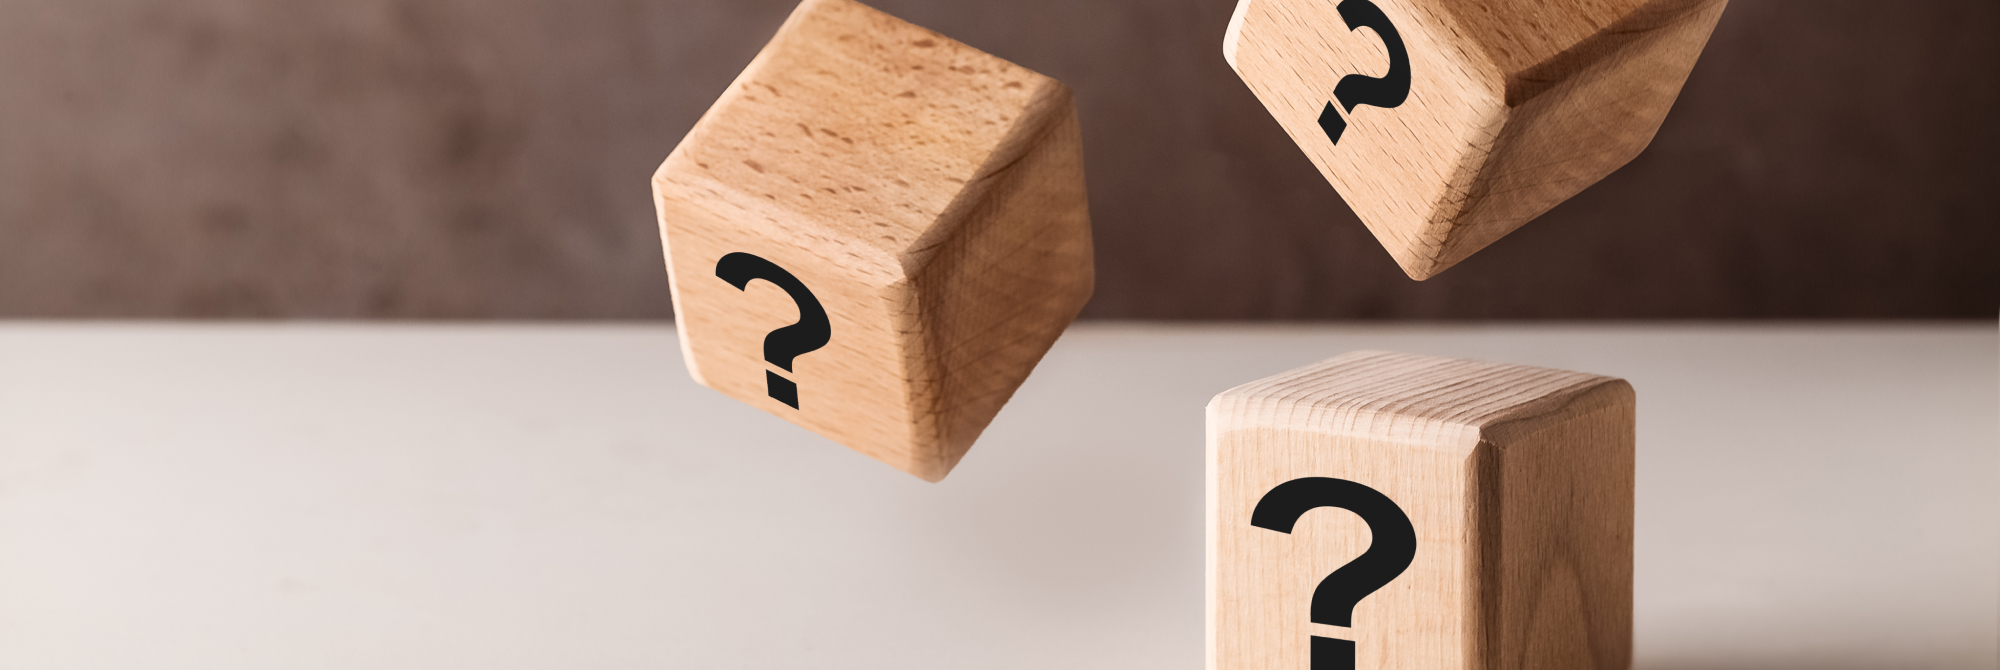 The five most popular and topical questions on equities